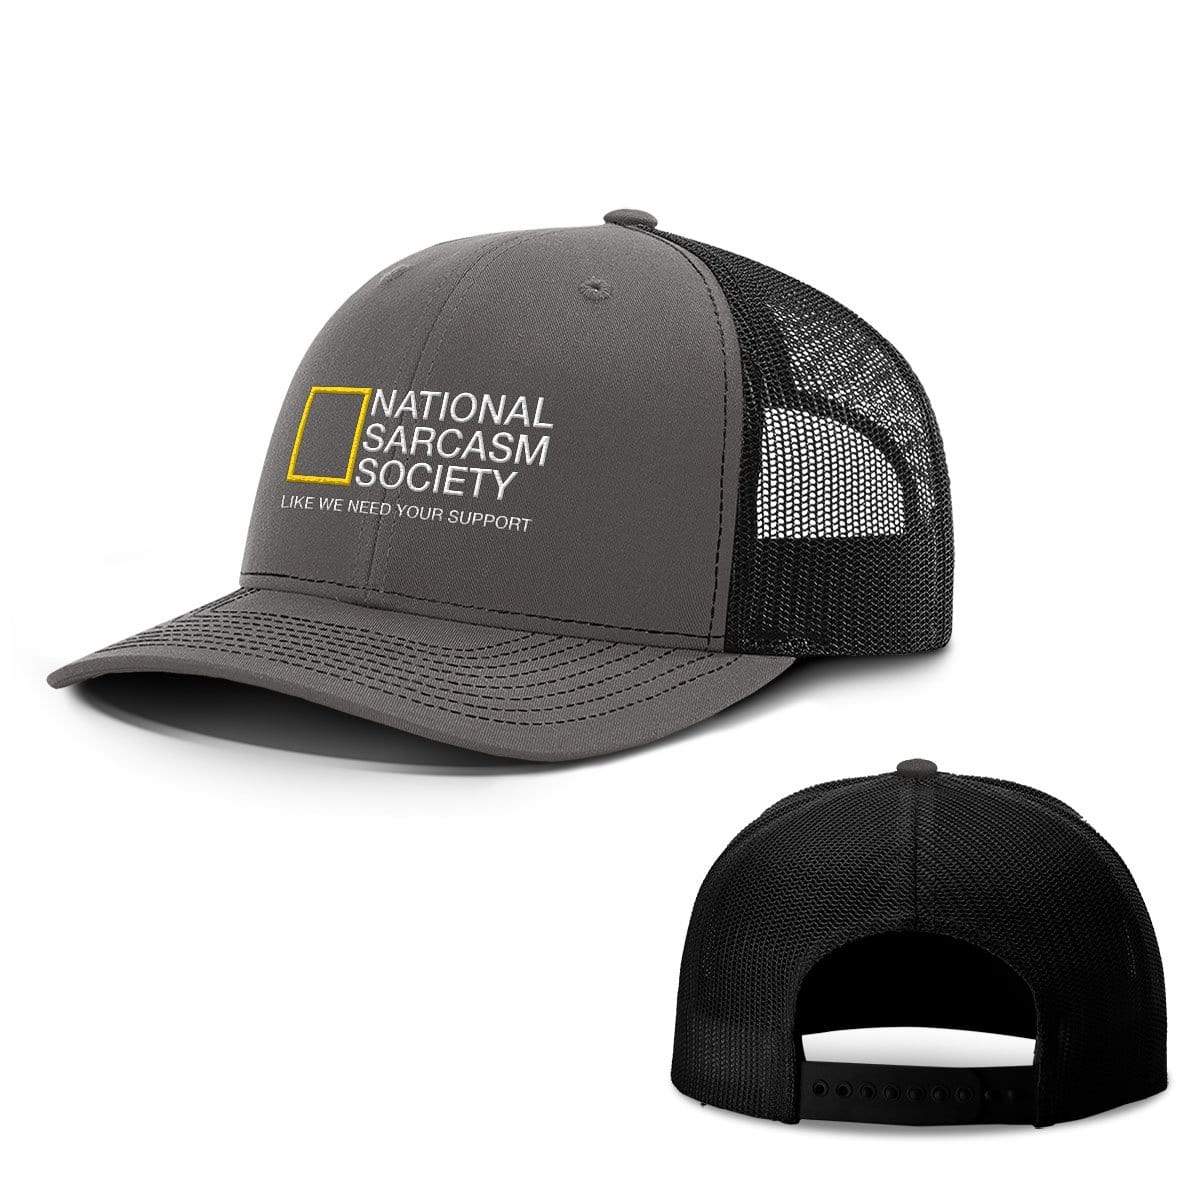 BustedTees.com Snapback / Charcoal and Black / One Size National Sarcasm Society Hats